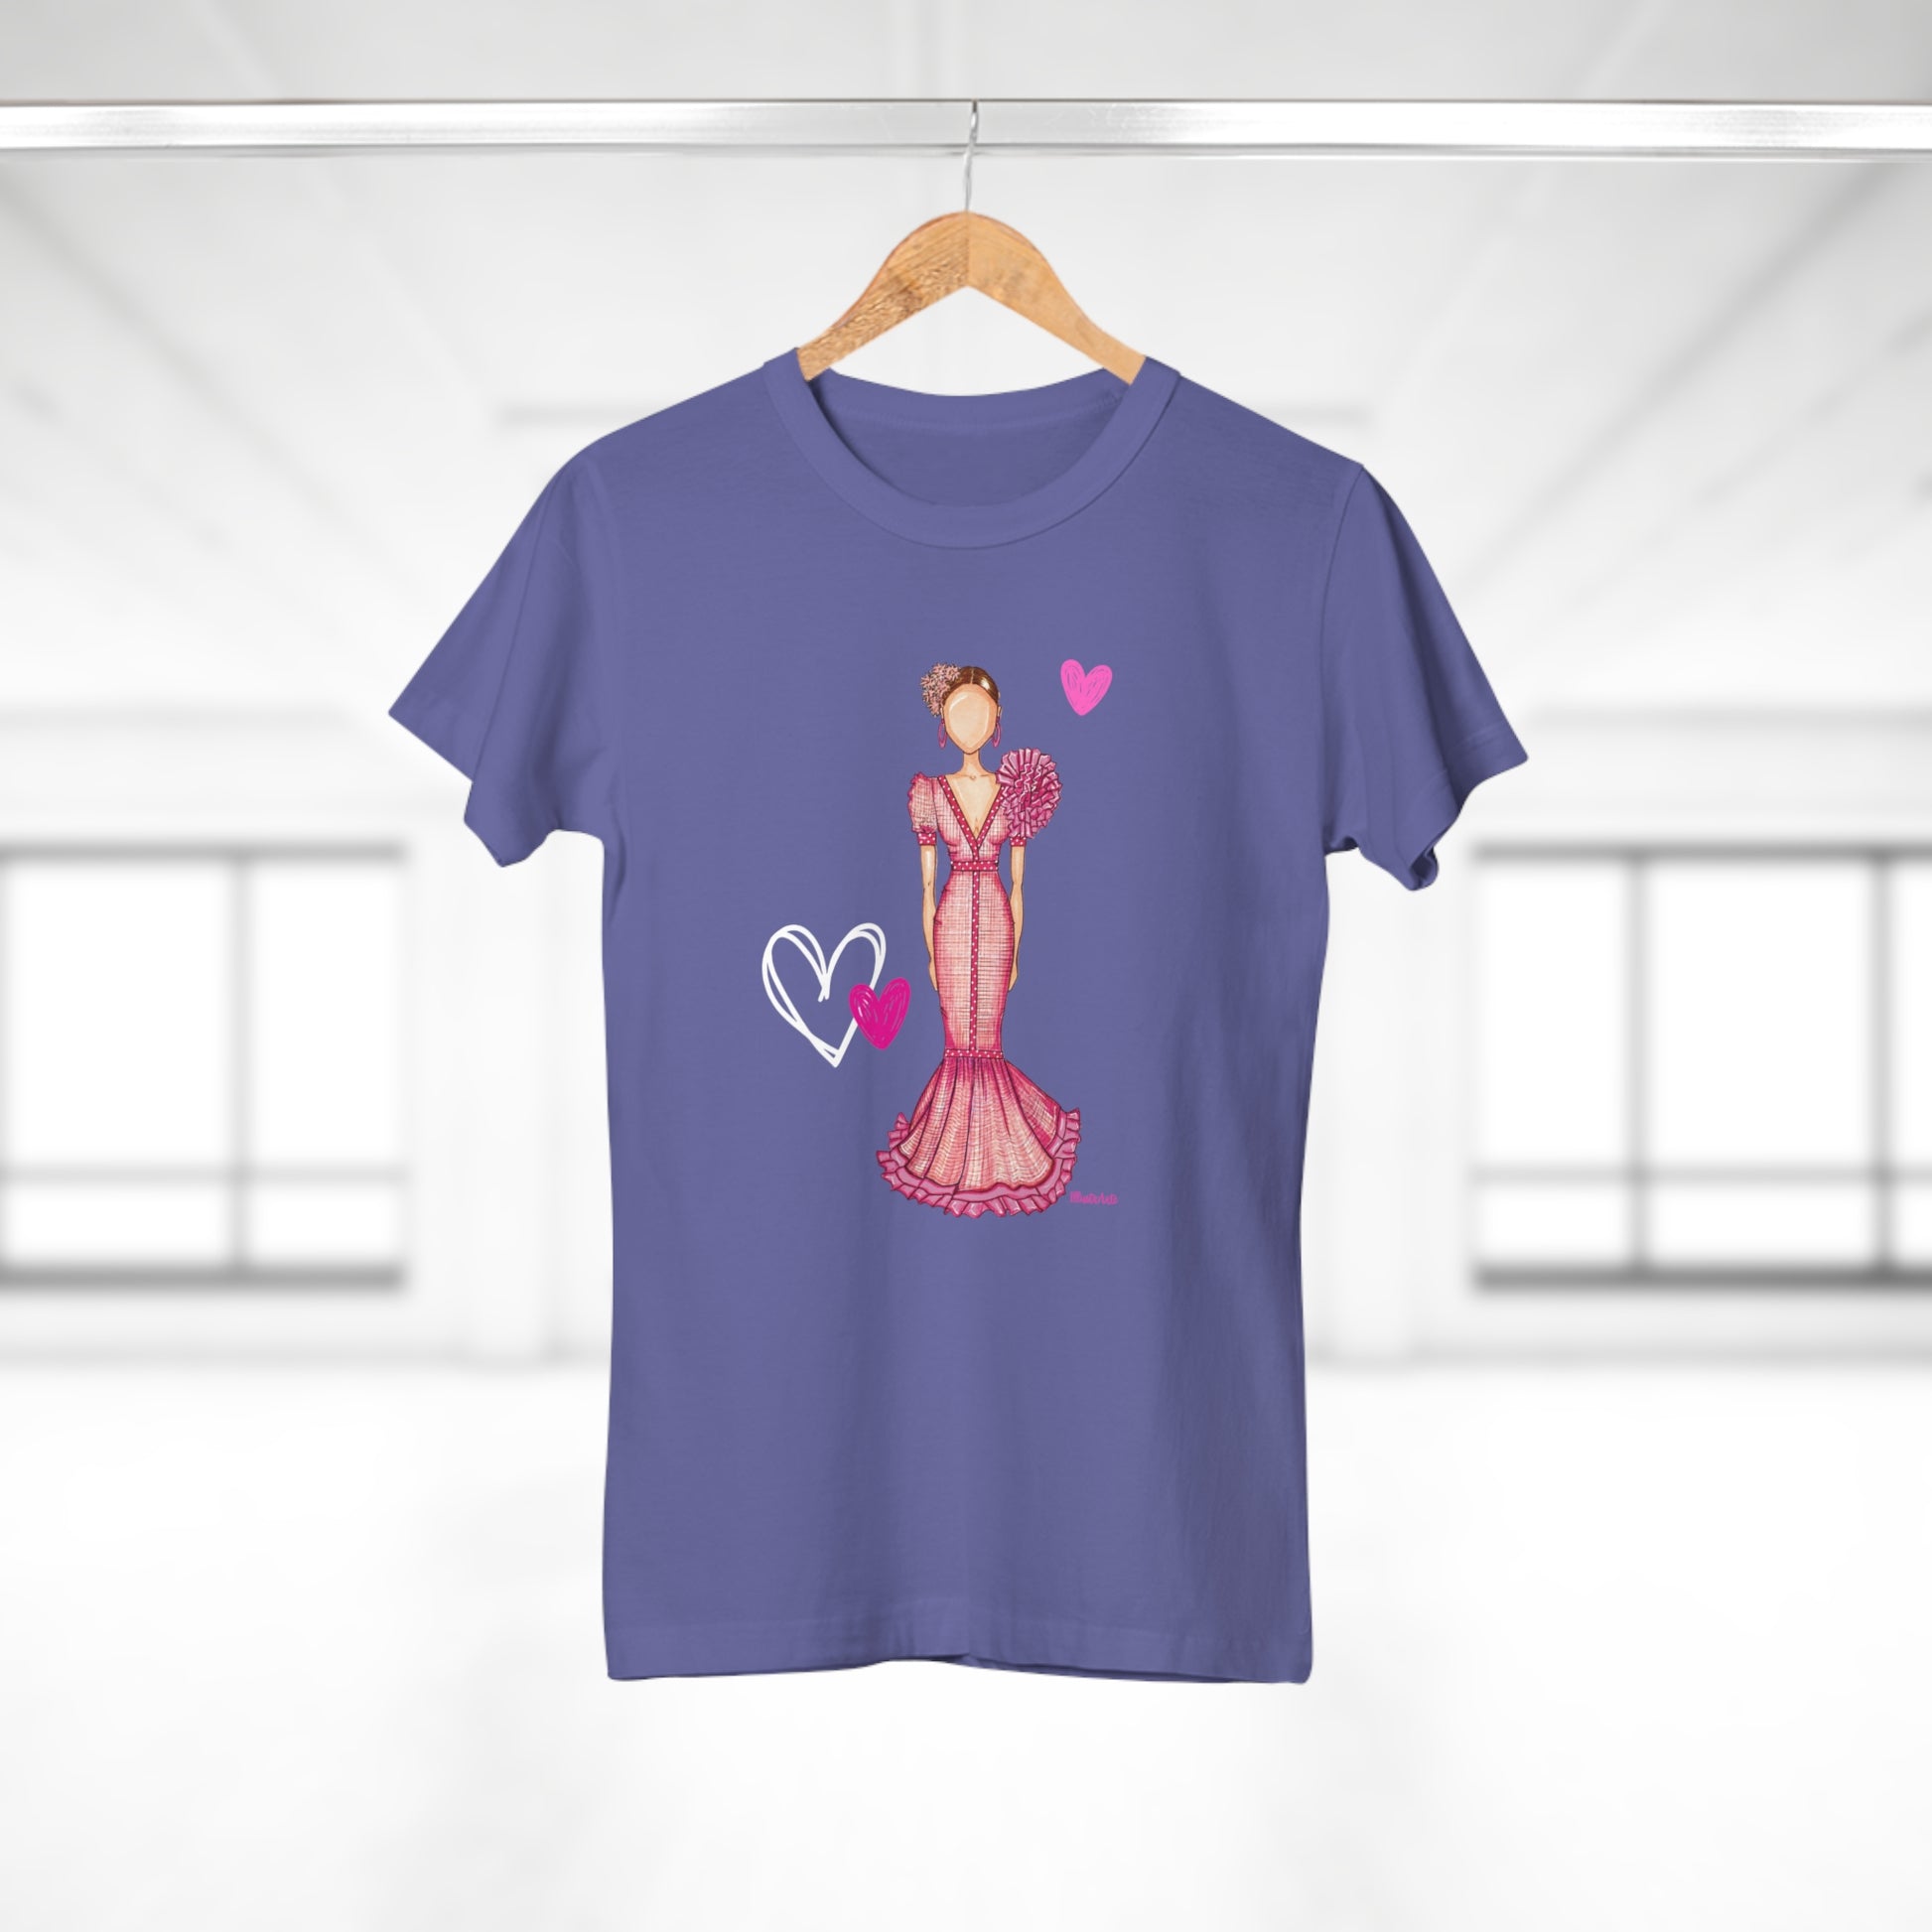 a t - shirt with a woman in a dress on a hanger